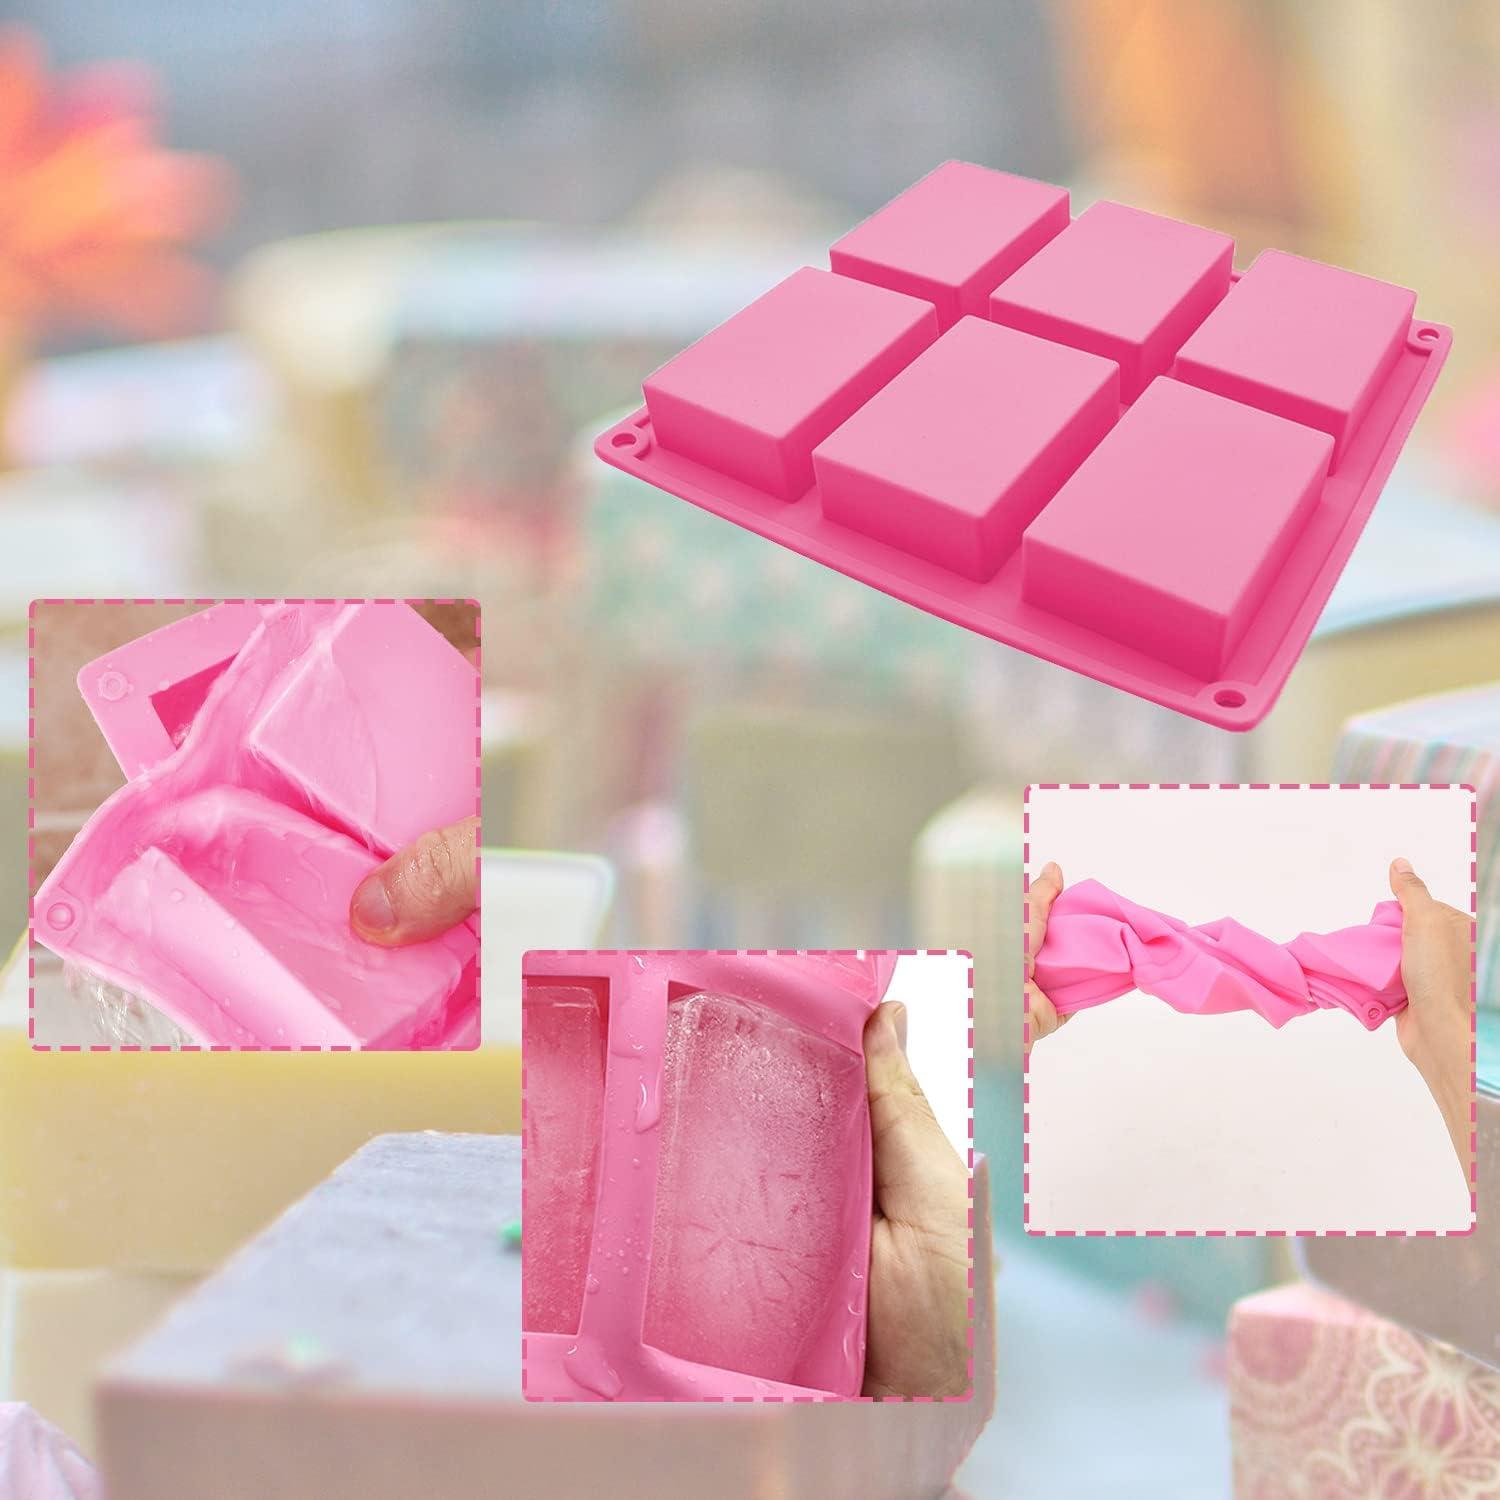 2pcs Handmade Square Silicone Mold With 6 Cavities For Soap, Cake